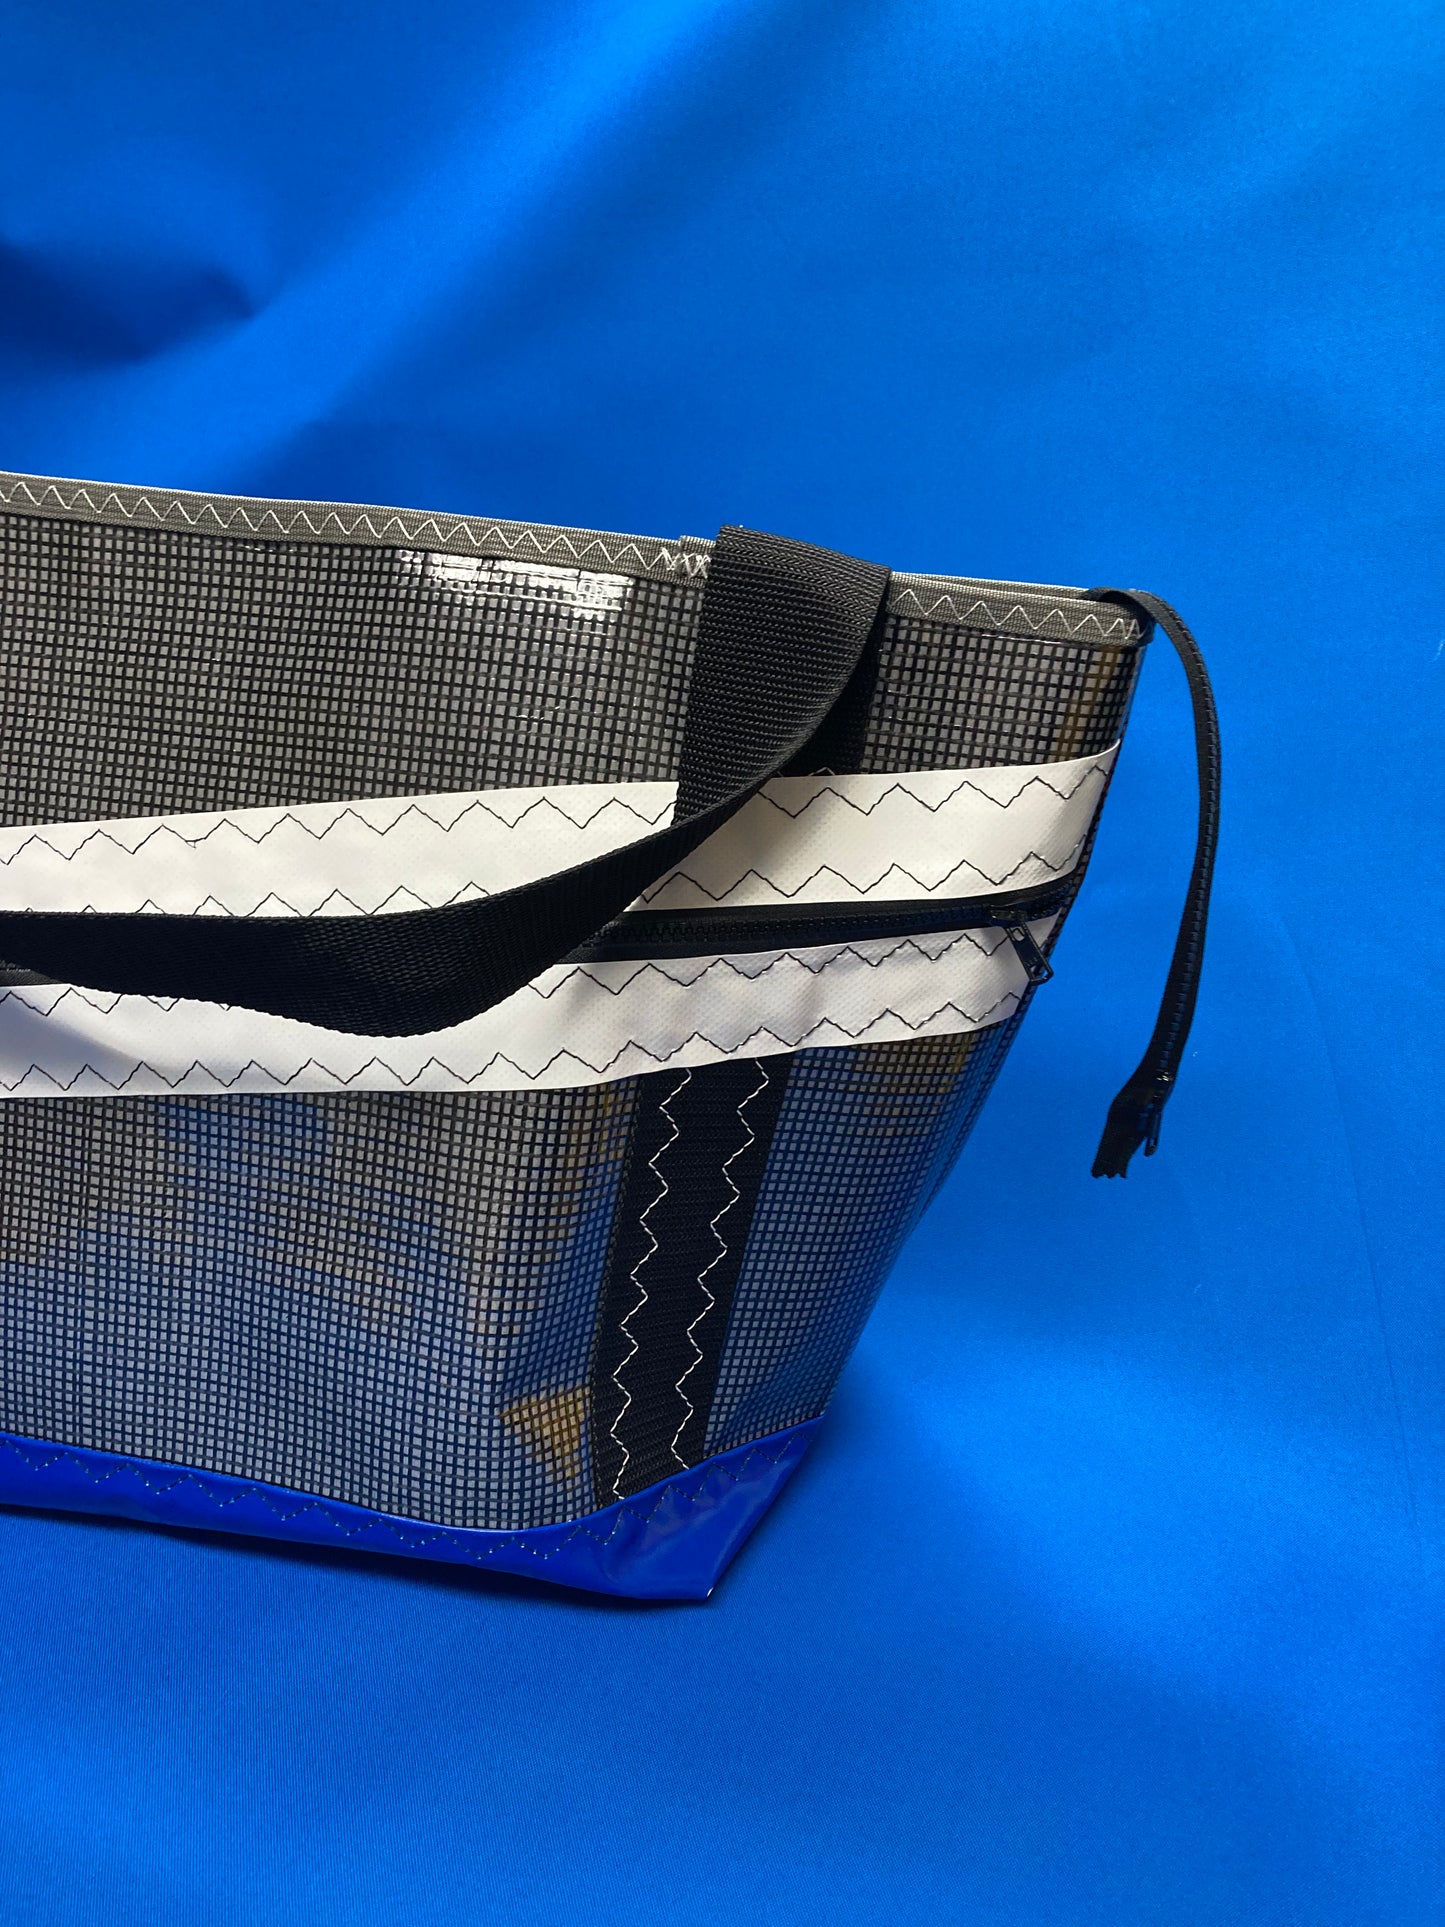 Stand up tote 171 black white blue